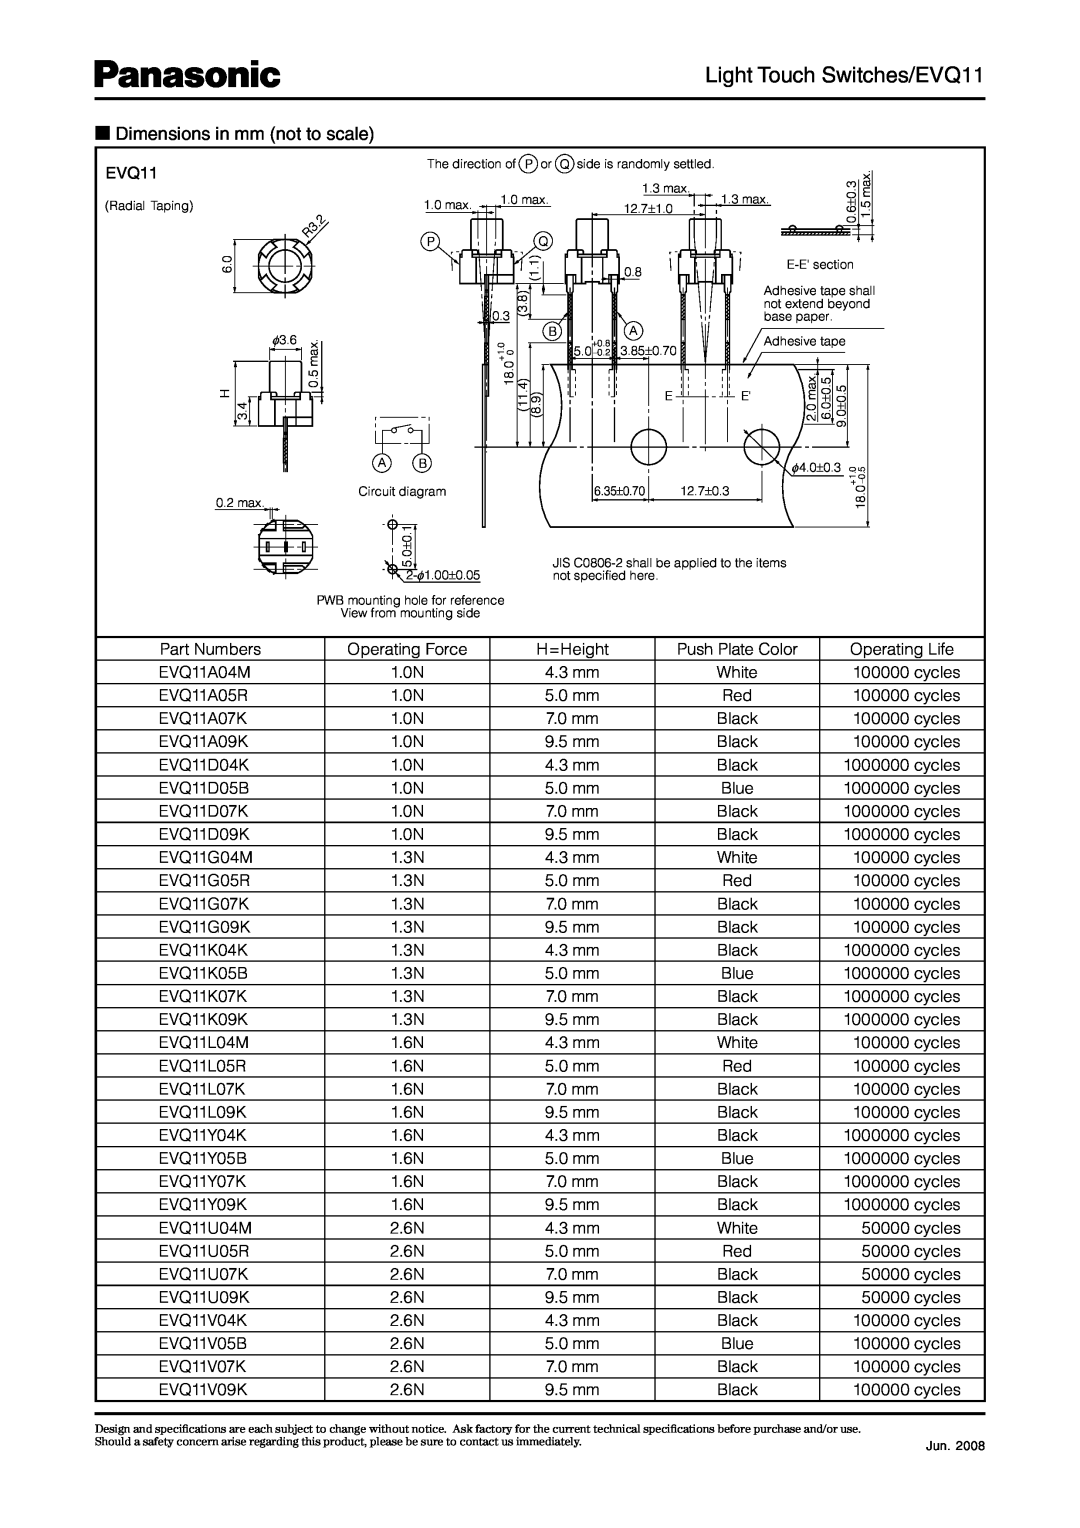 Panasonic specifications Light Touch Switches/EVQ11, Dimensions in mm not to scale 